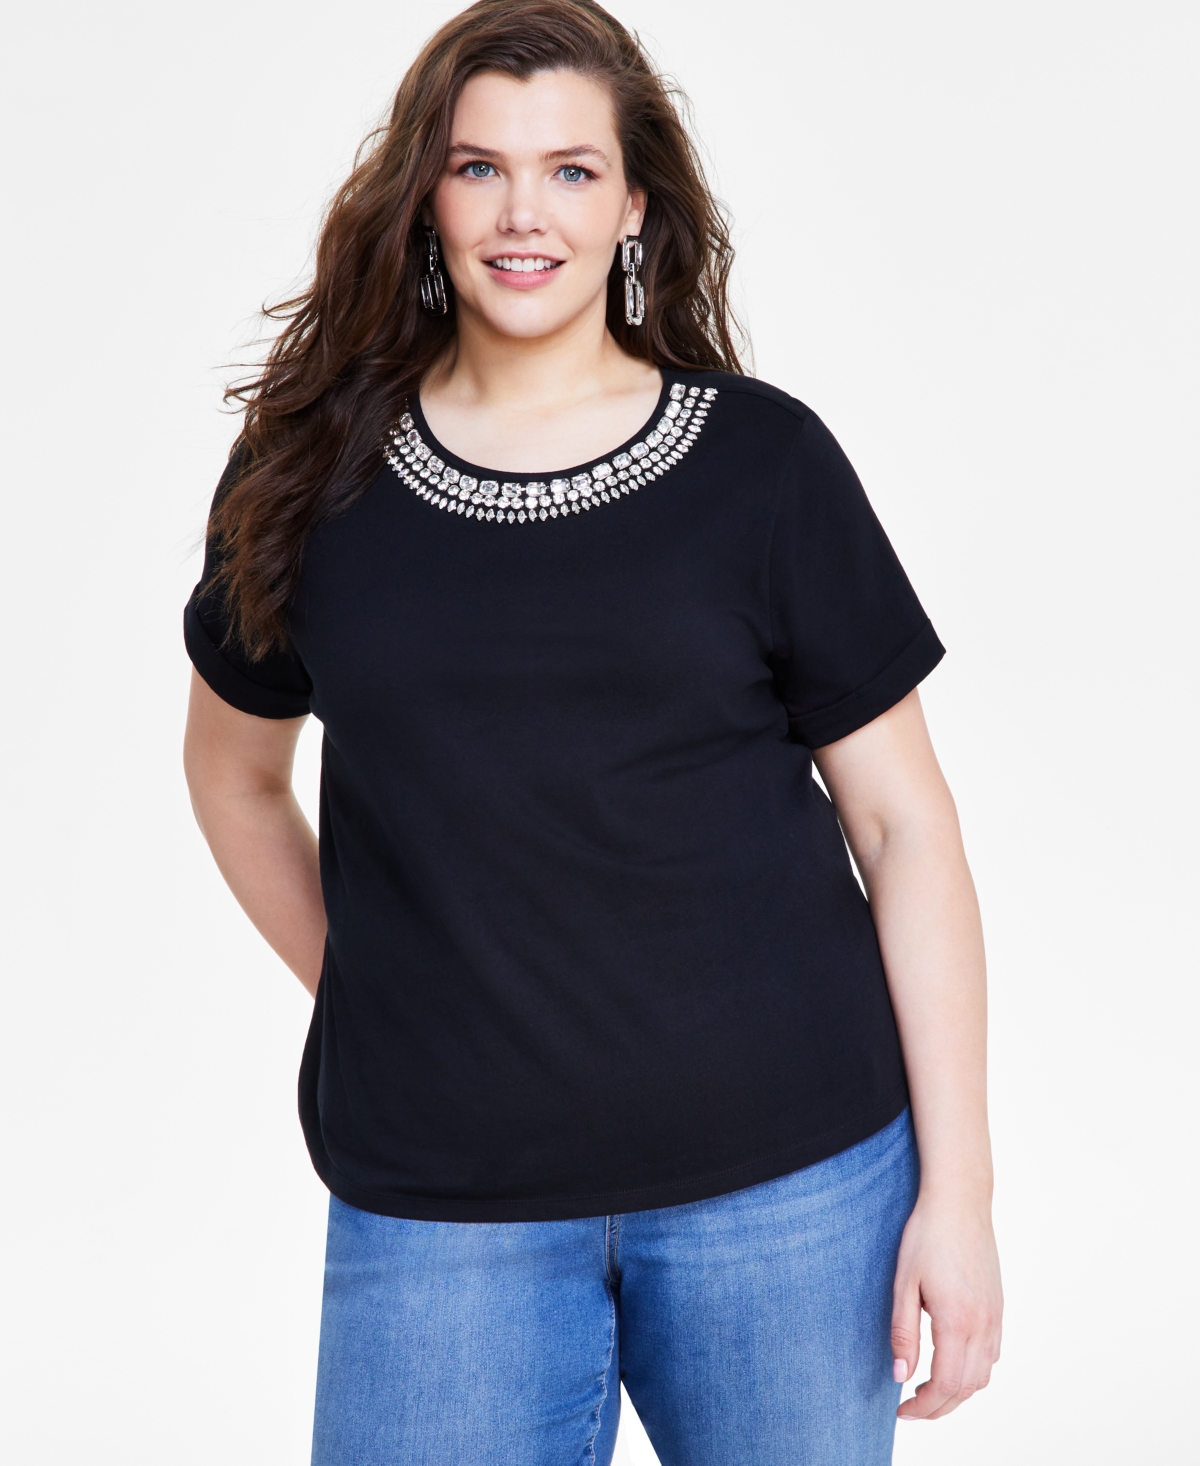 Plus Size Cotton Embellished Tee, Created for Macy's - Deep Black